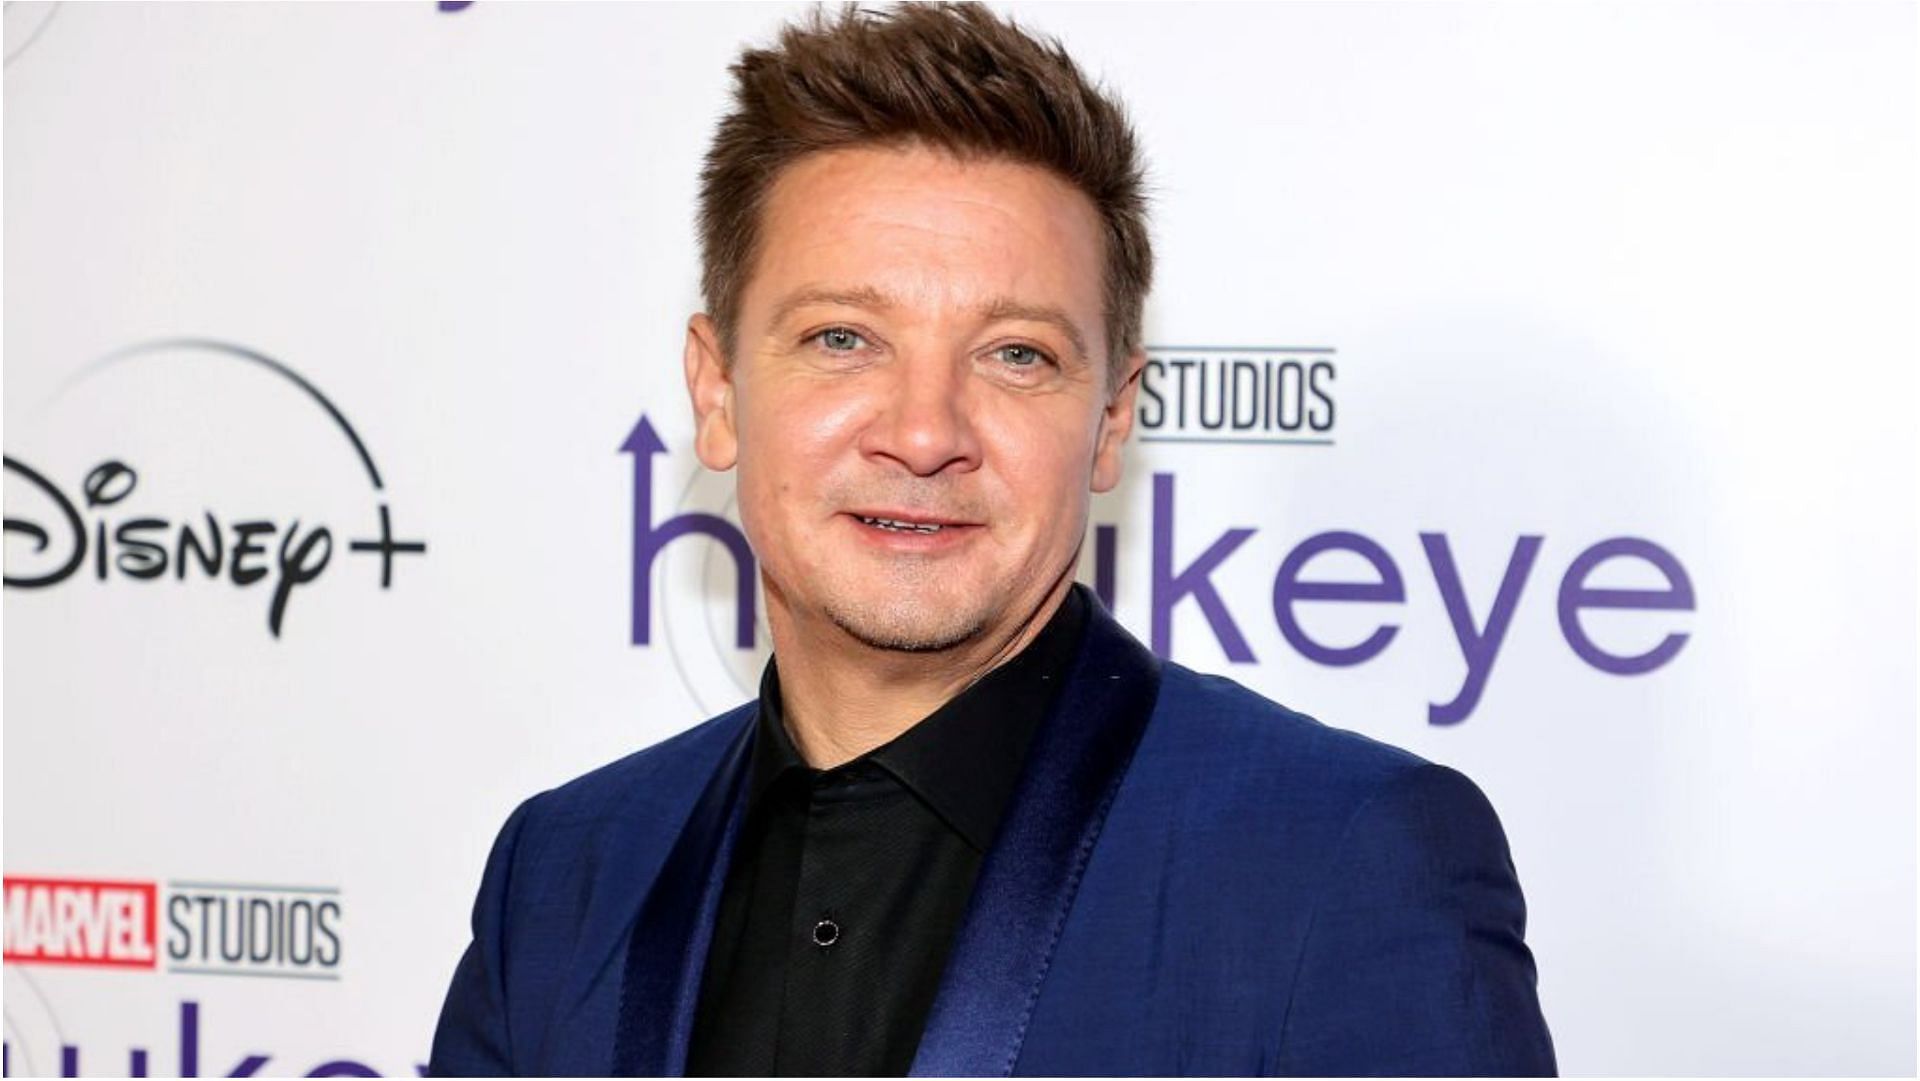 Jeremy Renner recently met with an accident and was hospitalized (Image via Theo Wargo/Getty Images)